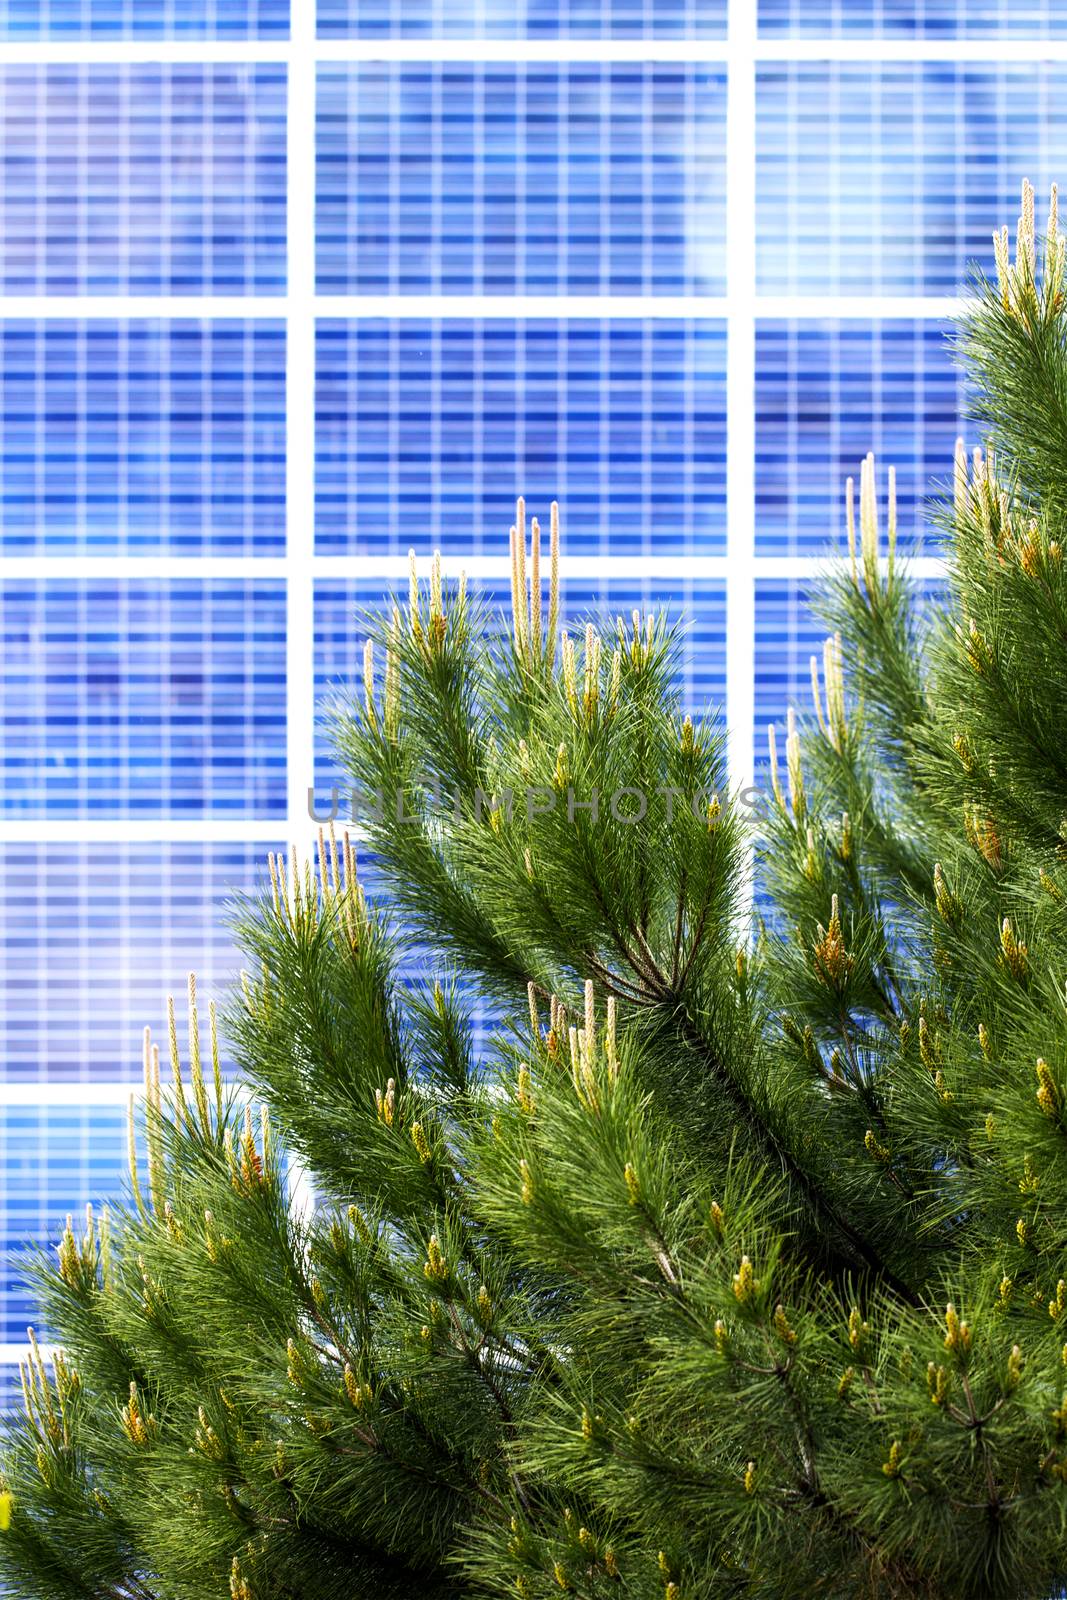 Renewable, alternative solar energy, photocell - solar panels on the wall of the building. In front of it are fluffy branches of green pine, as a symbol of environmental friendliness.